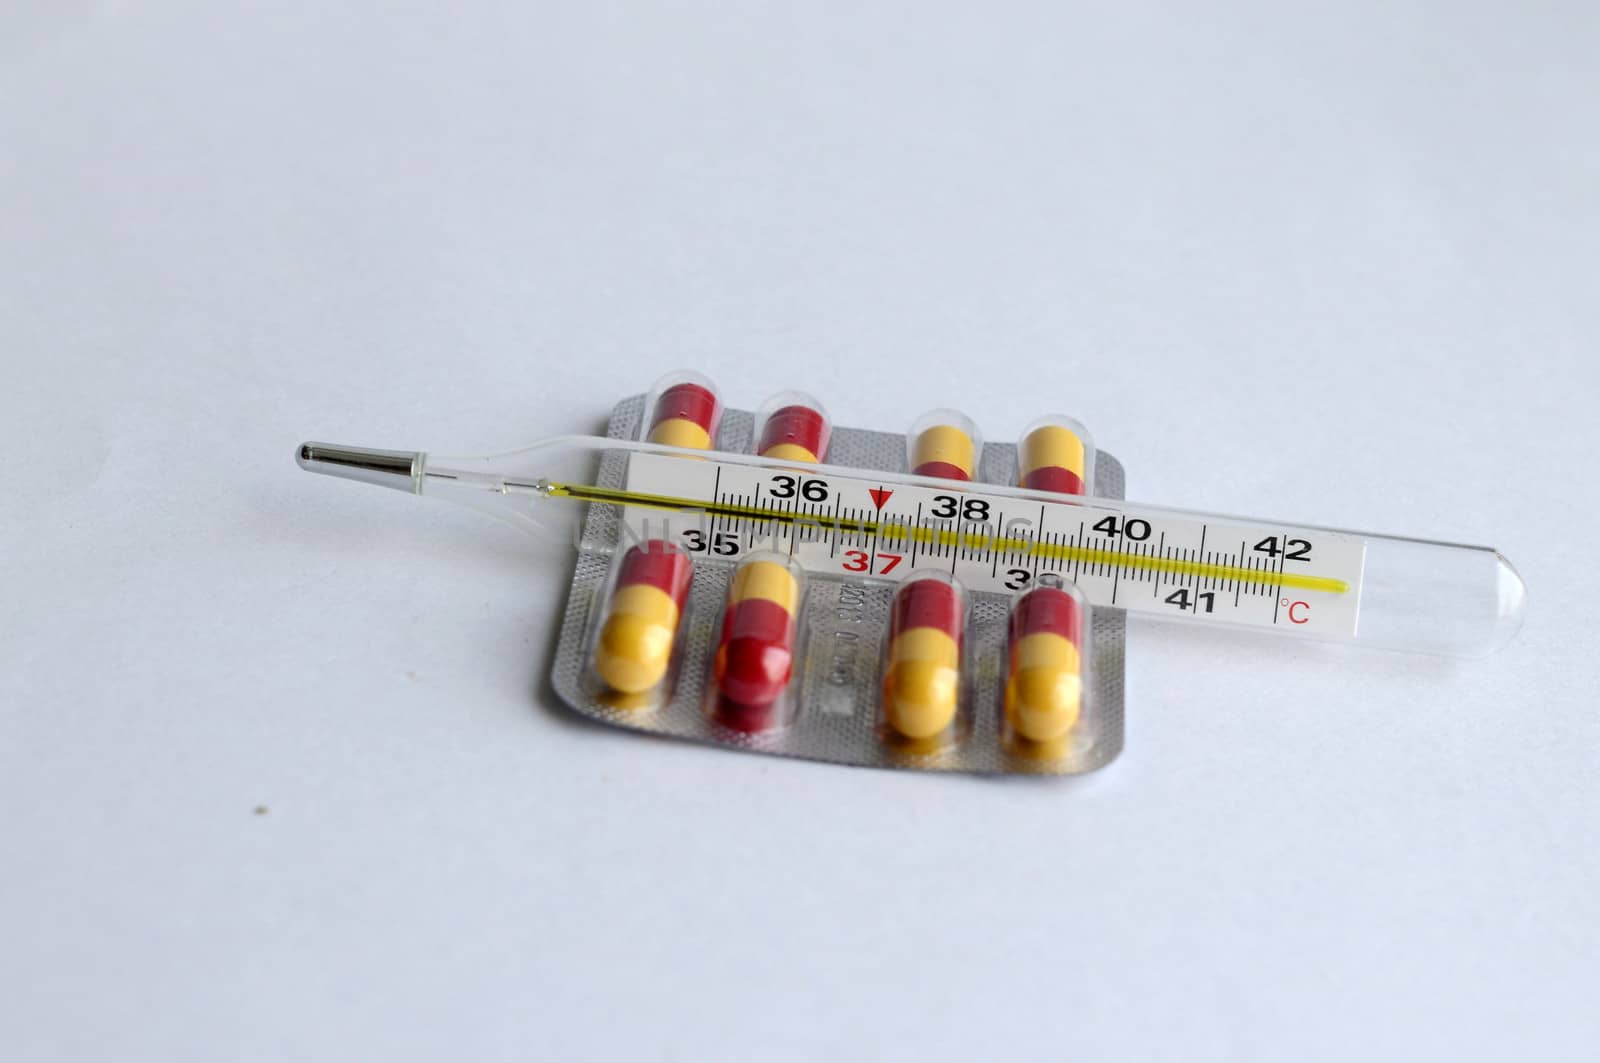 The increased temperature on a thermometer and pills